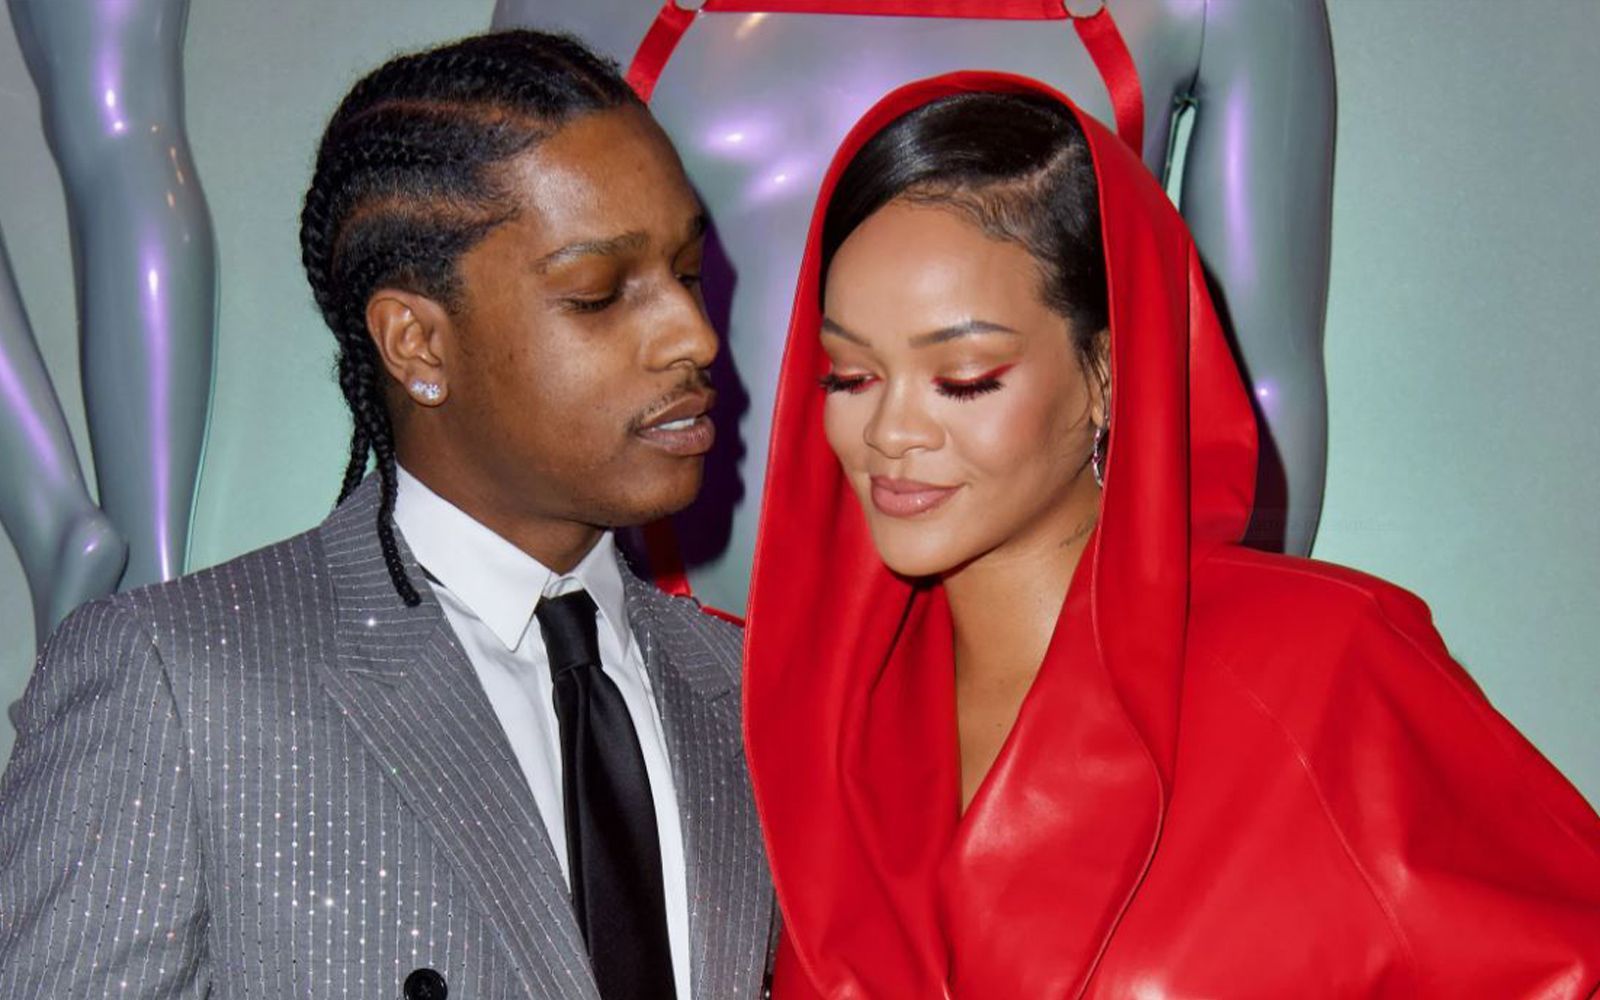 A$AP Rocky's change of perspective is thanks to Rihanna and fatherhood